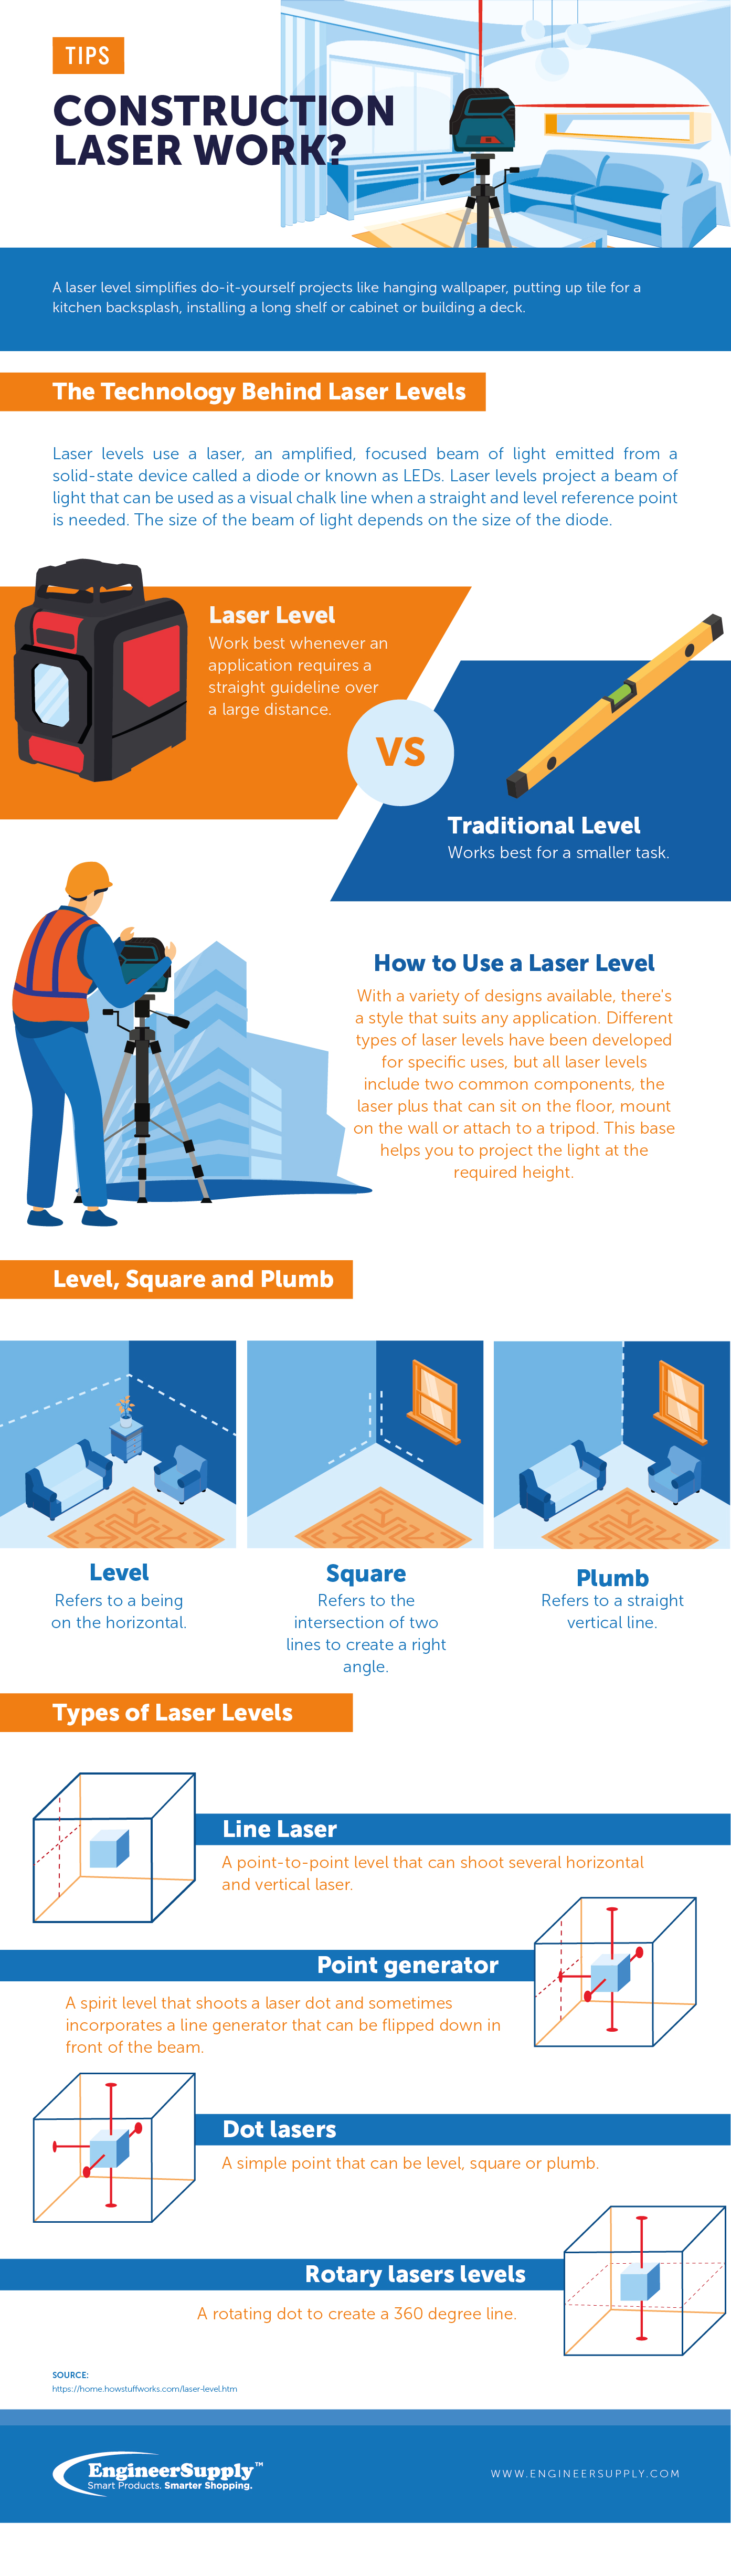 How To Use A Lazer Level How Does a Construction Laser Work | Engineer Supply - EngineerSupply